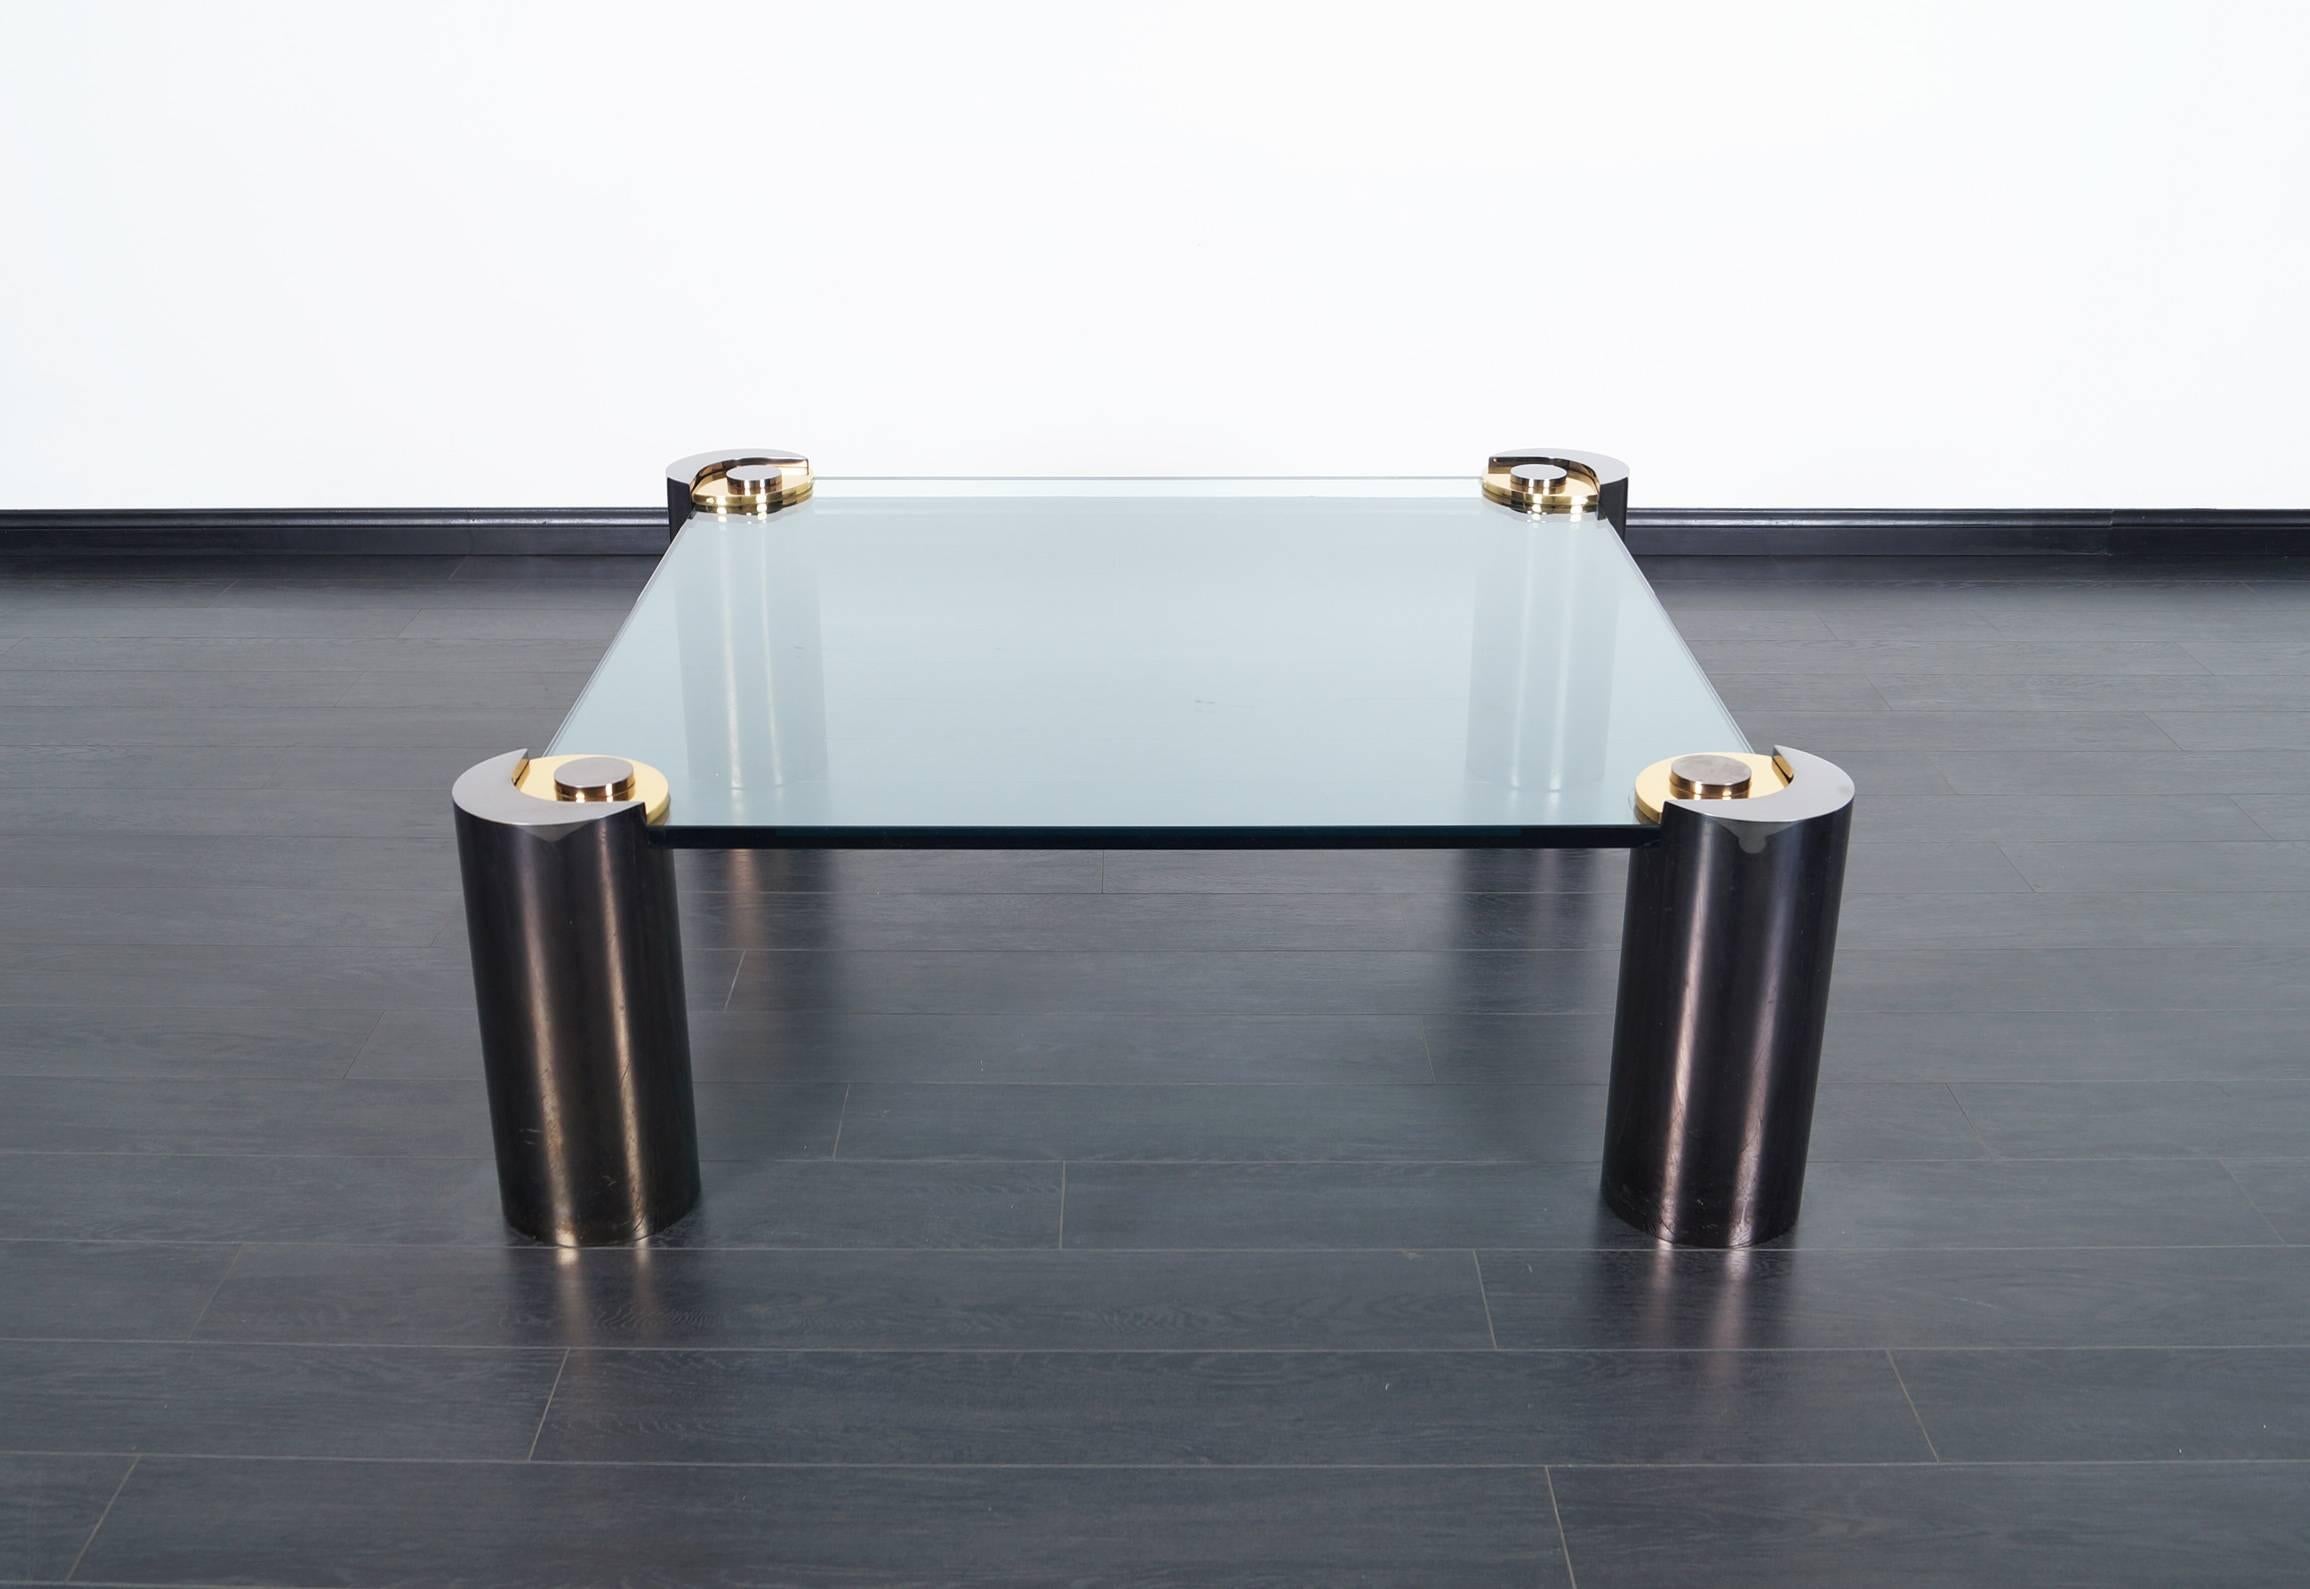 This stunning rare glass & gunmetal coffee table was designed by Karl Springer. Features four sculptural gunmetal legs with thick cantilevered glass top. One of the table base is signed Karl Springer.